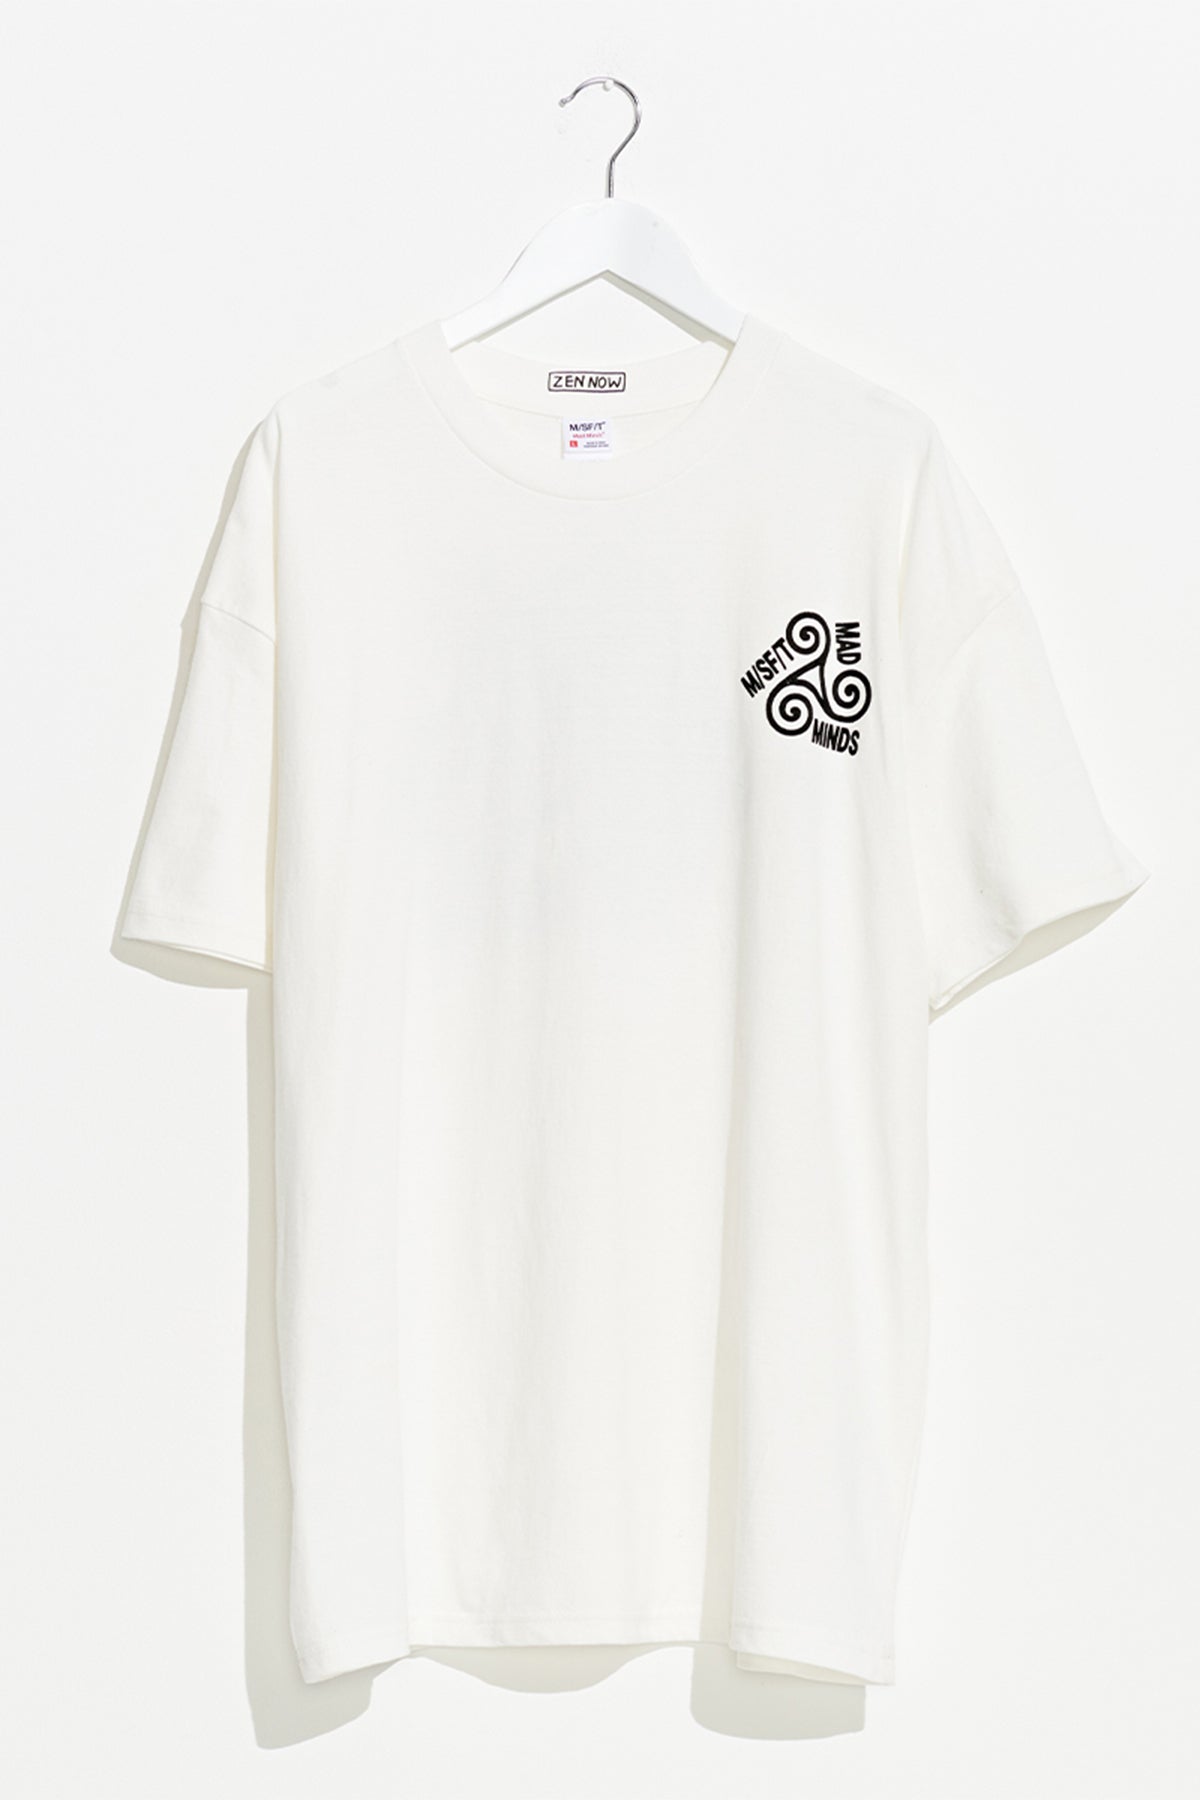 Misfit - Ritual Calls 50/50 AAA SS Tee - Washed White